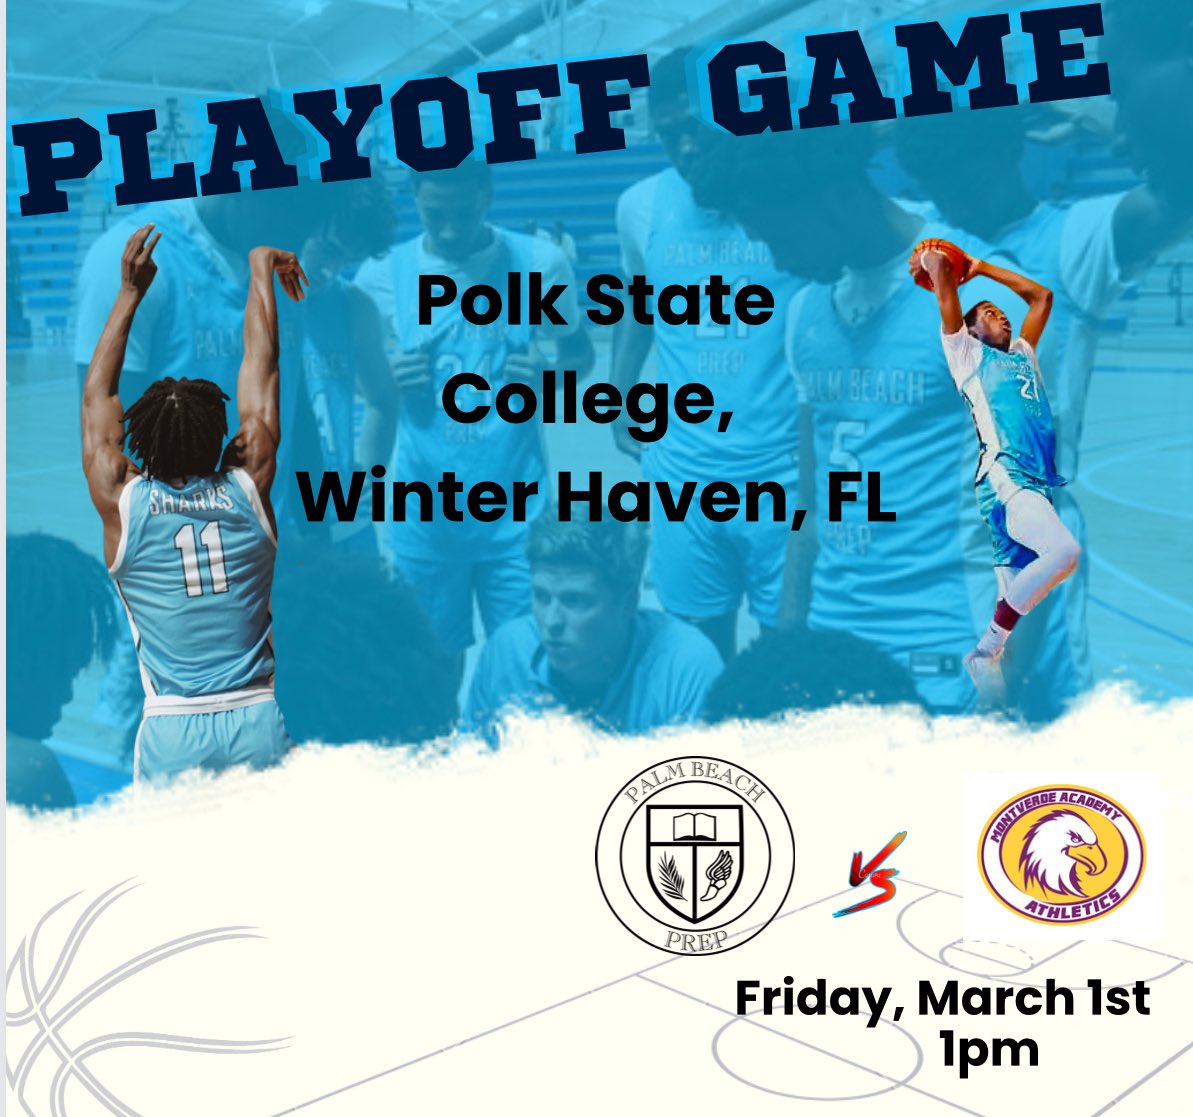 It’s Game Day 🔥 The Sharks travel to Polk State for the Quarter Finals of the @PHSBA_US State Championship against Montverde Academy 🏝️🦈 Live Stream Link: m.youtube.com/live/kd28iw5A_…